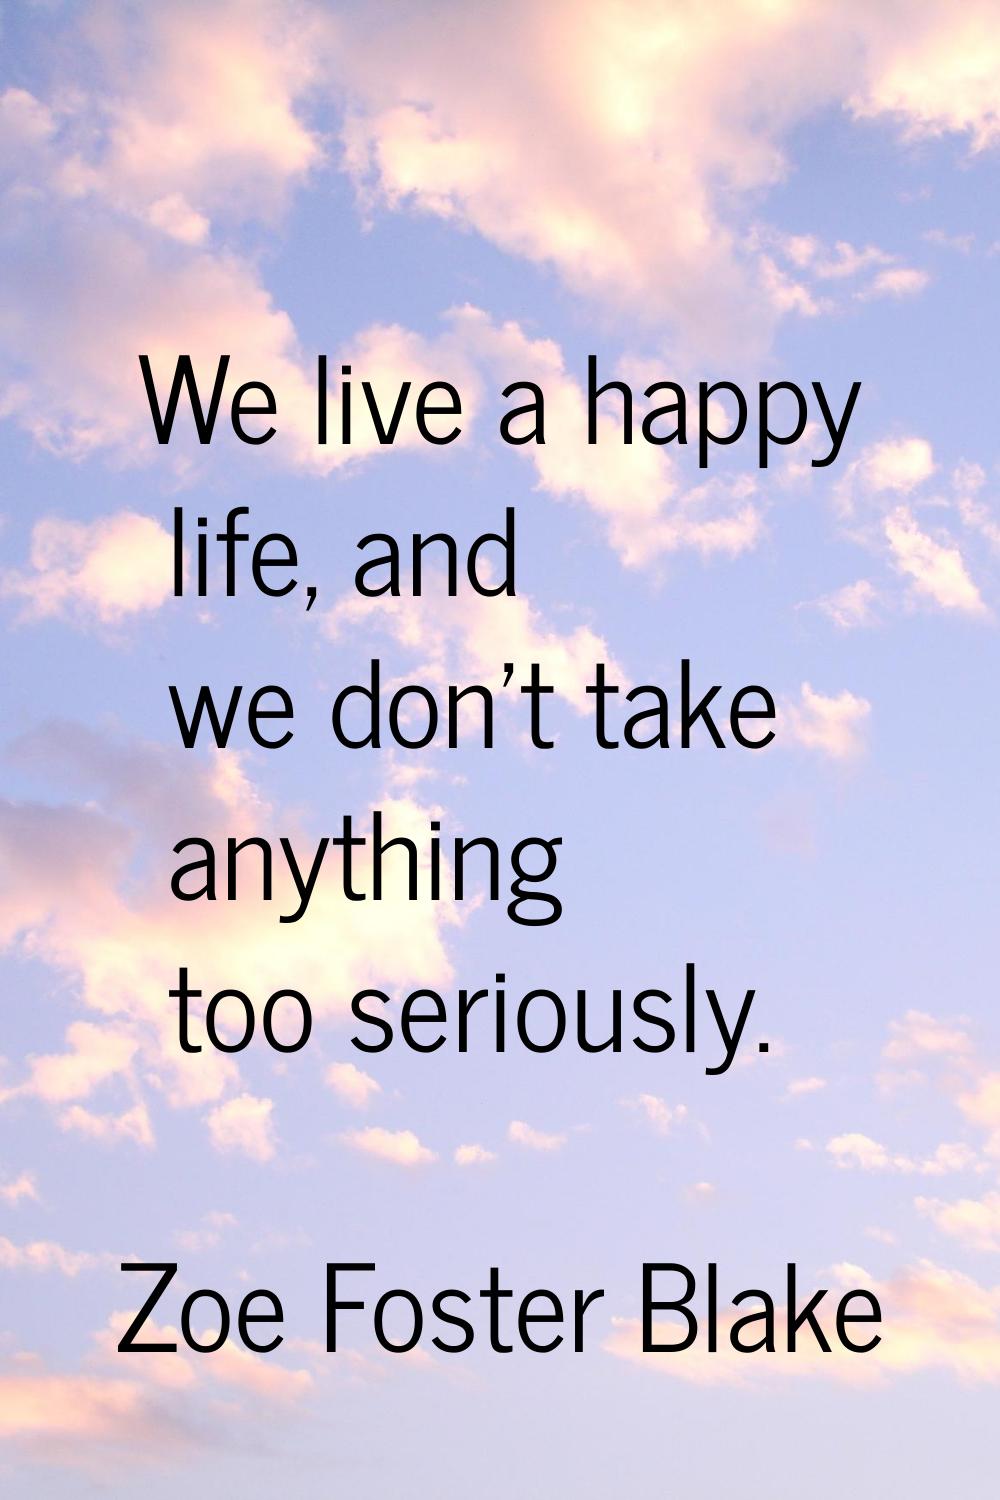 We live a happy life, and we don't take anything too seriously.